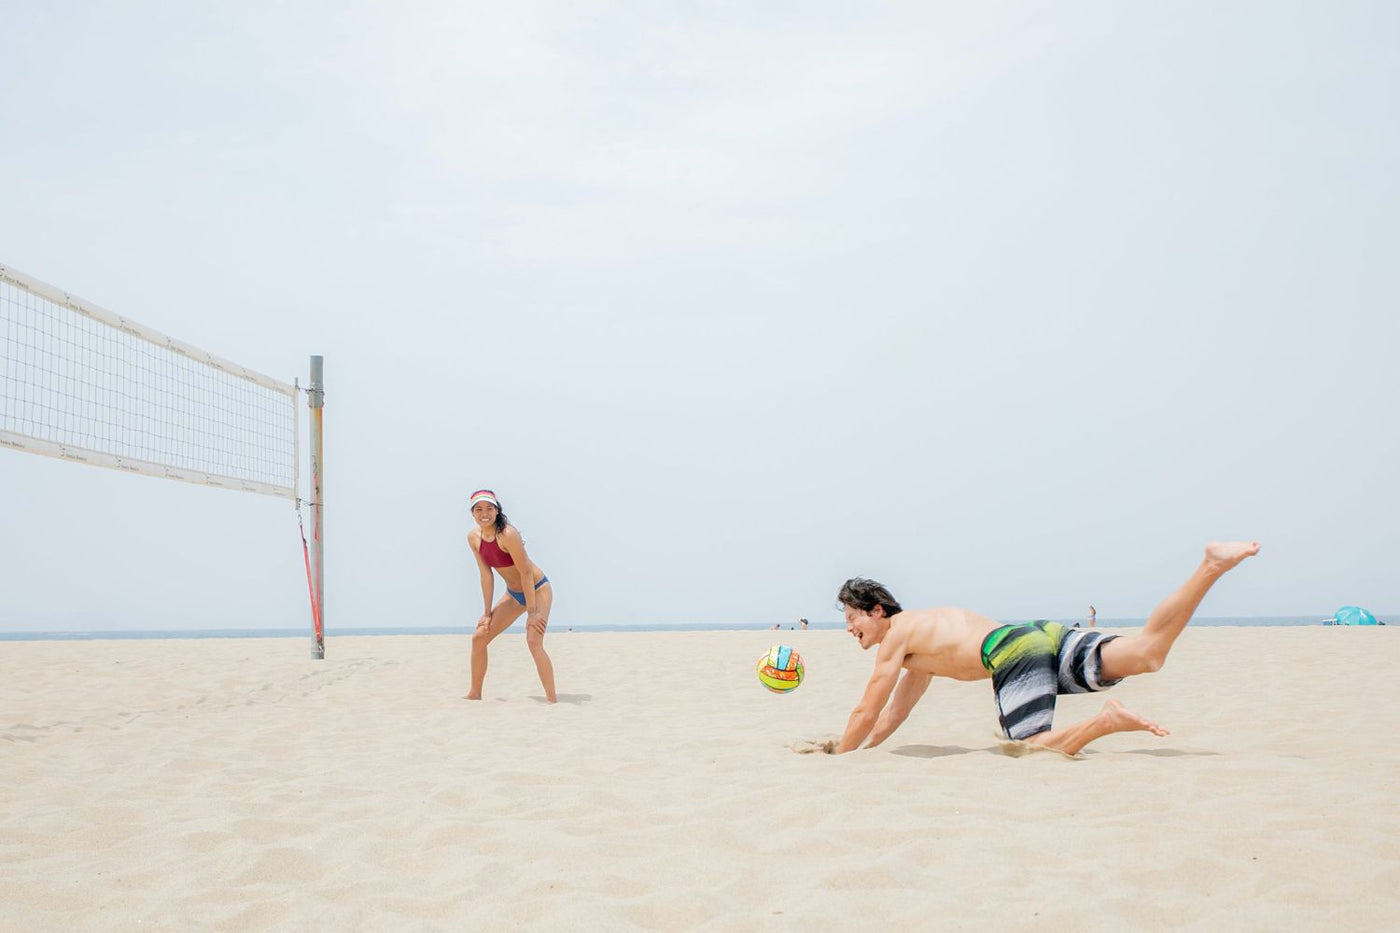 Young people playing beach volleyball. One of the players is falling in an attempt to catch the ball